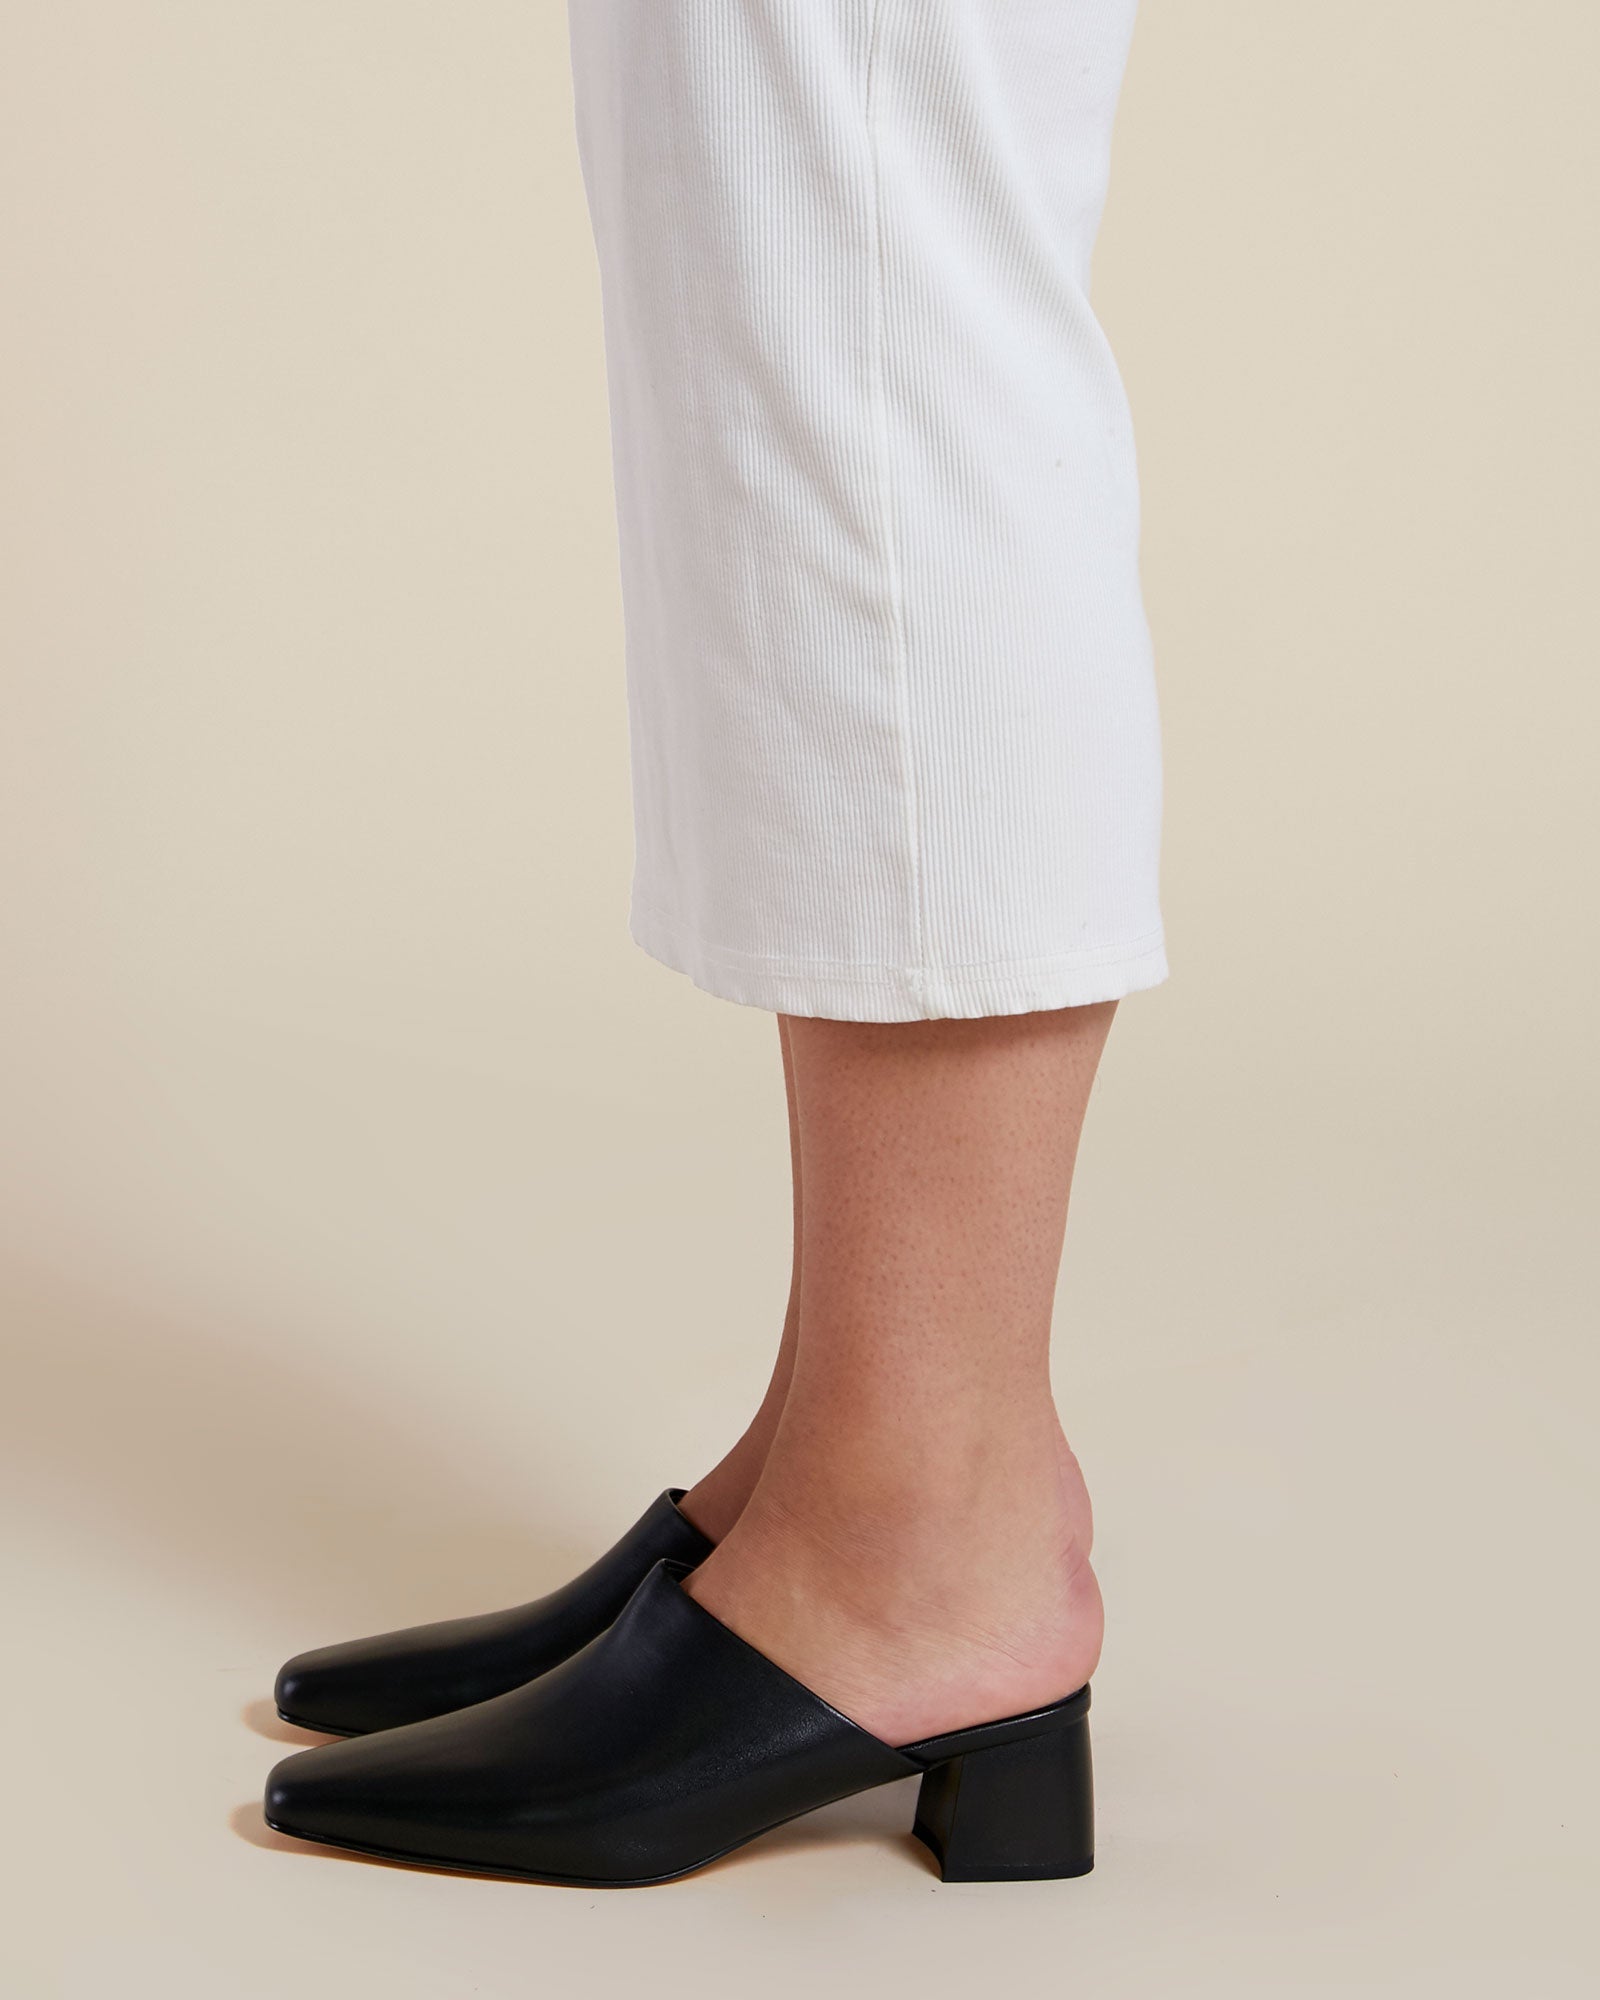 Backless Black Leather Mule With A Comfy Block Heel